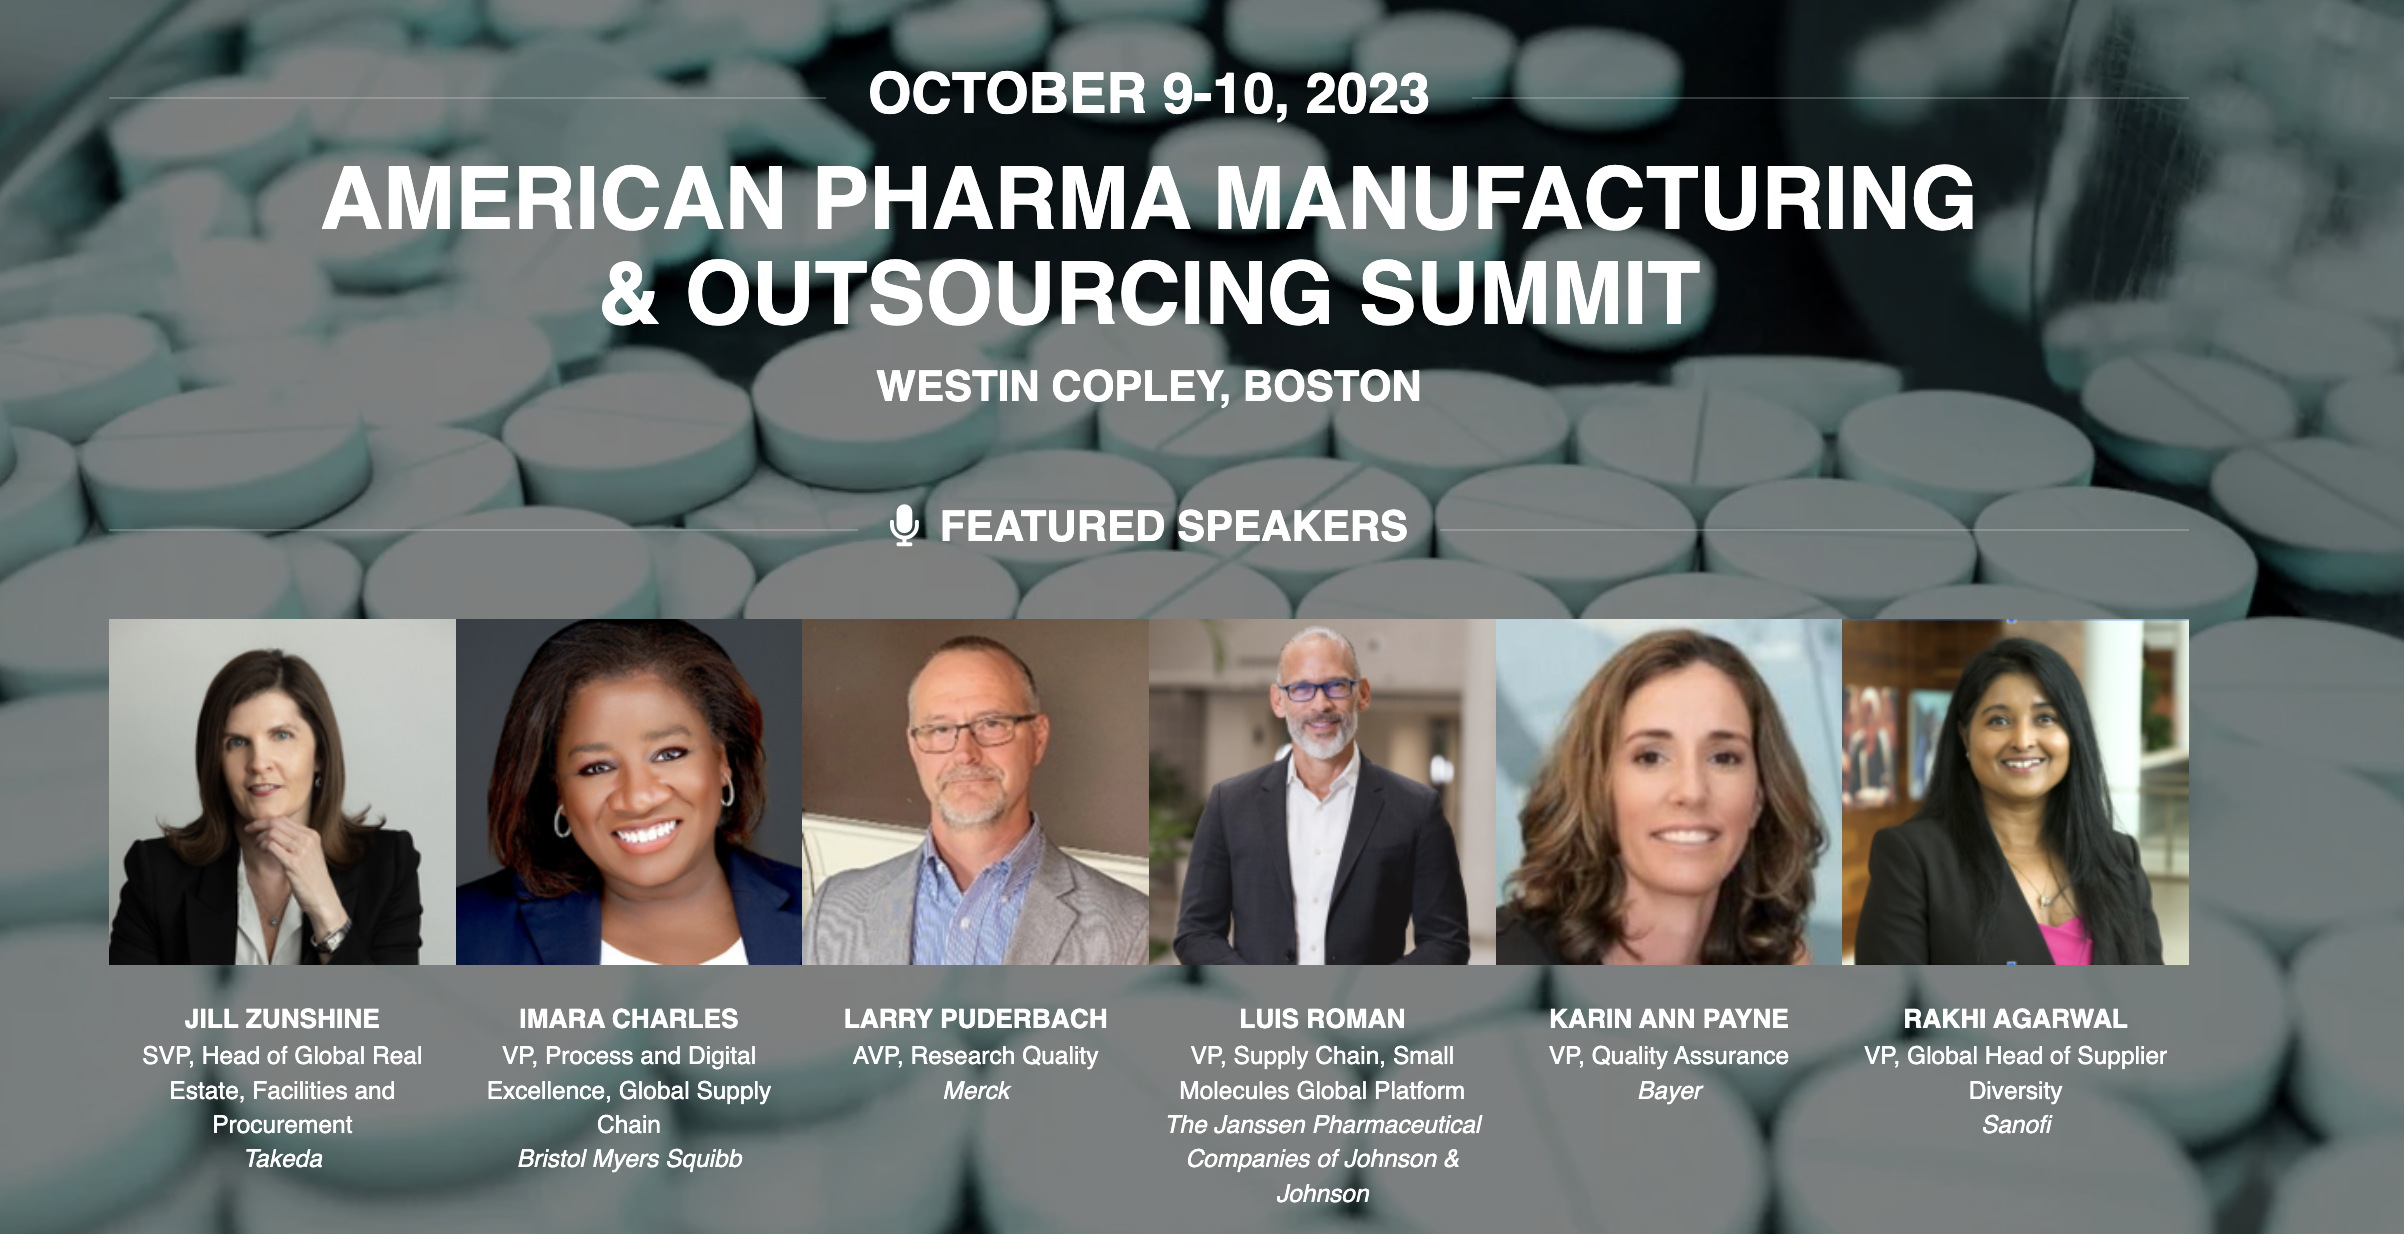 American Pharma Manufacturing & Outsourcing Summit